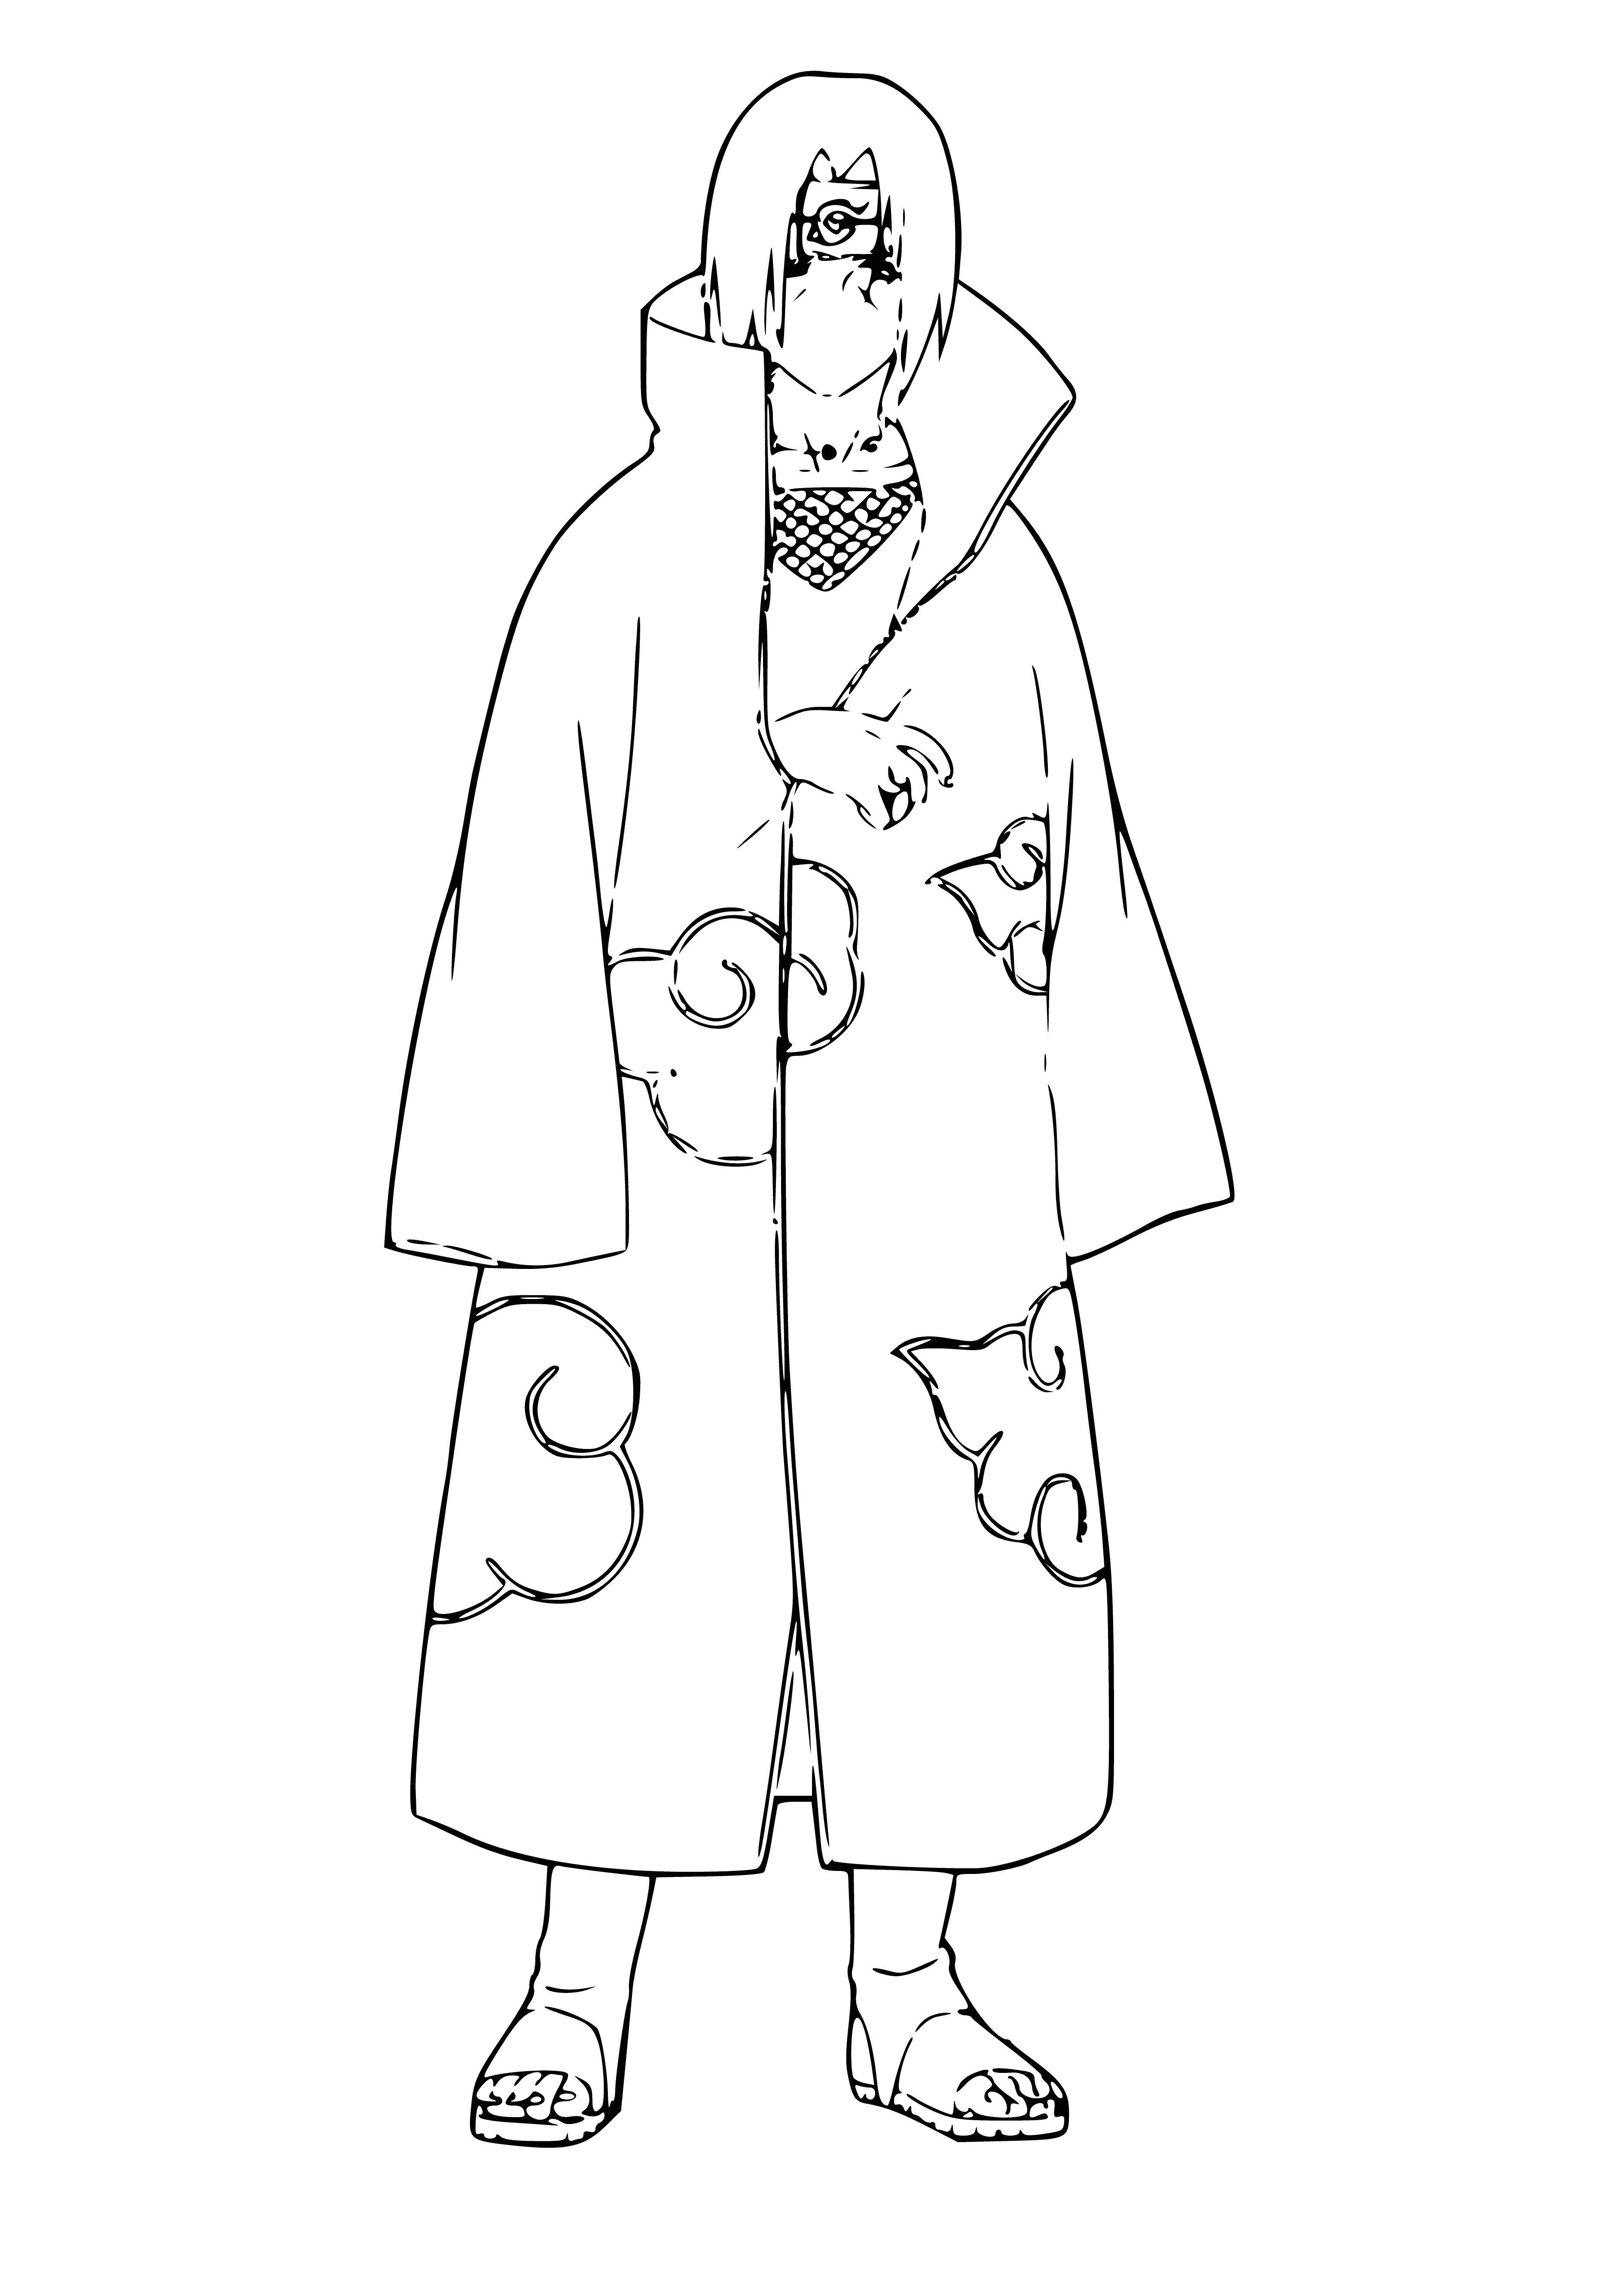 coloring page: Man in black cloak with sword strapped to back; wears black shirt with red inside cloak. #coloringpage